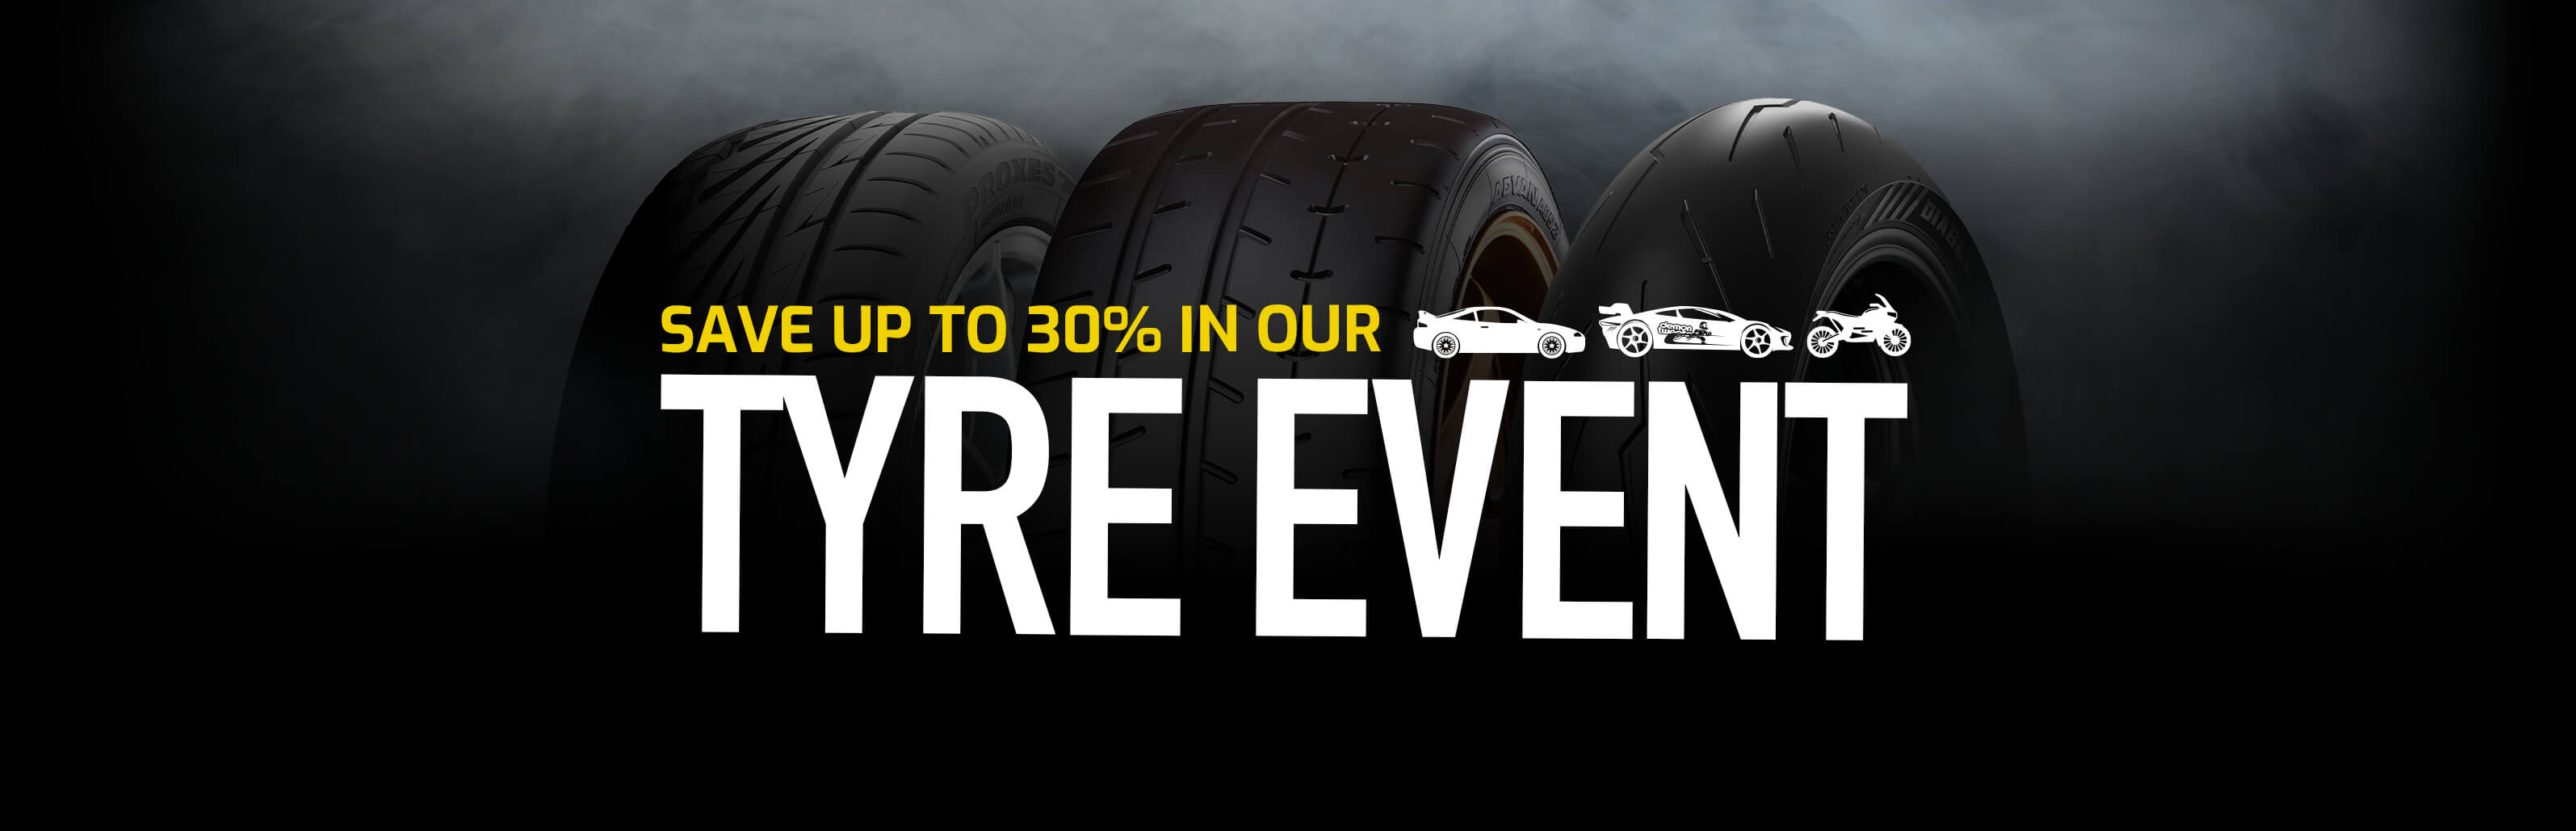 Save up to 30% in our Tyre Event